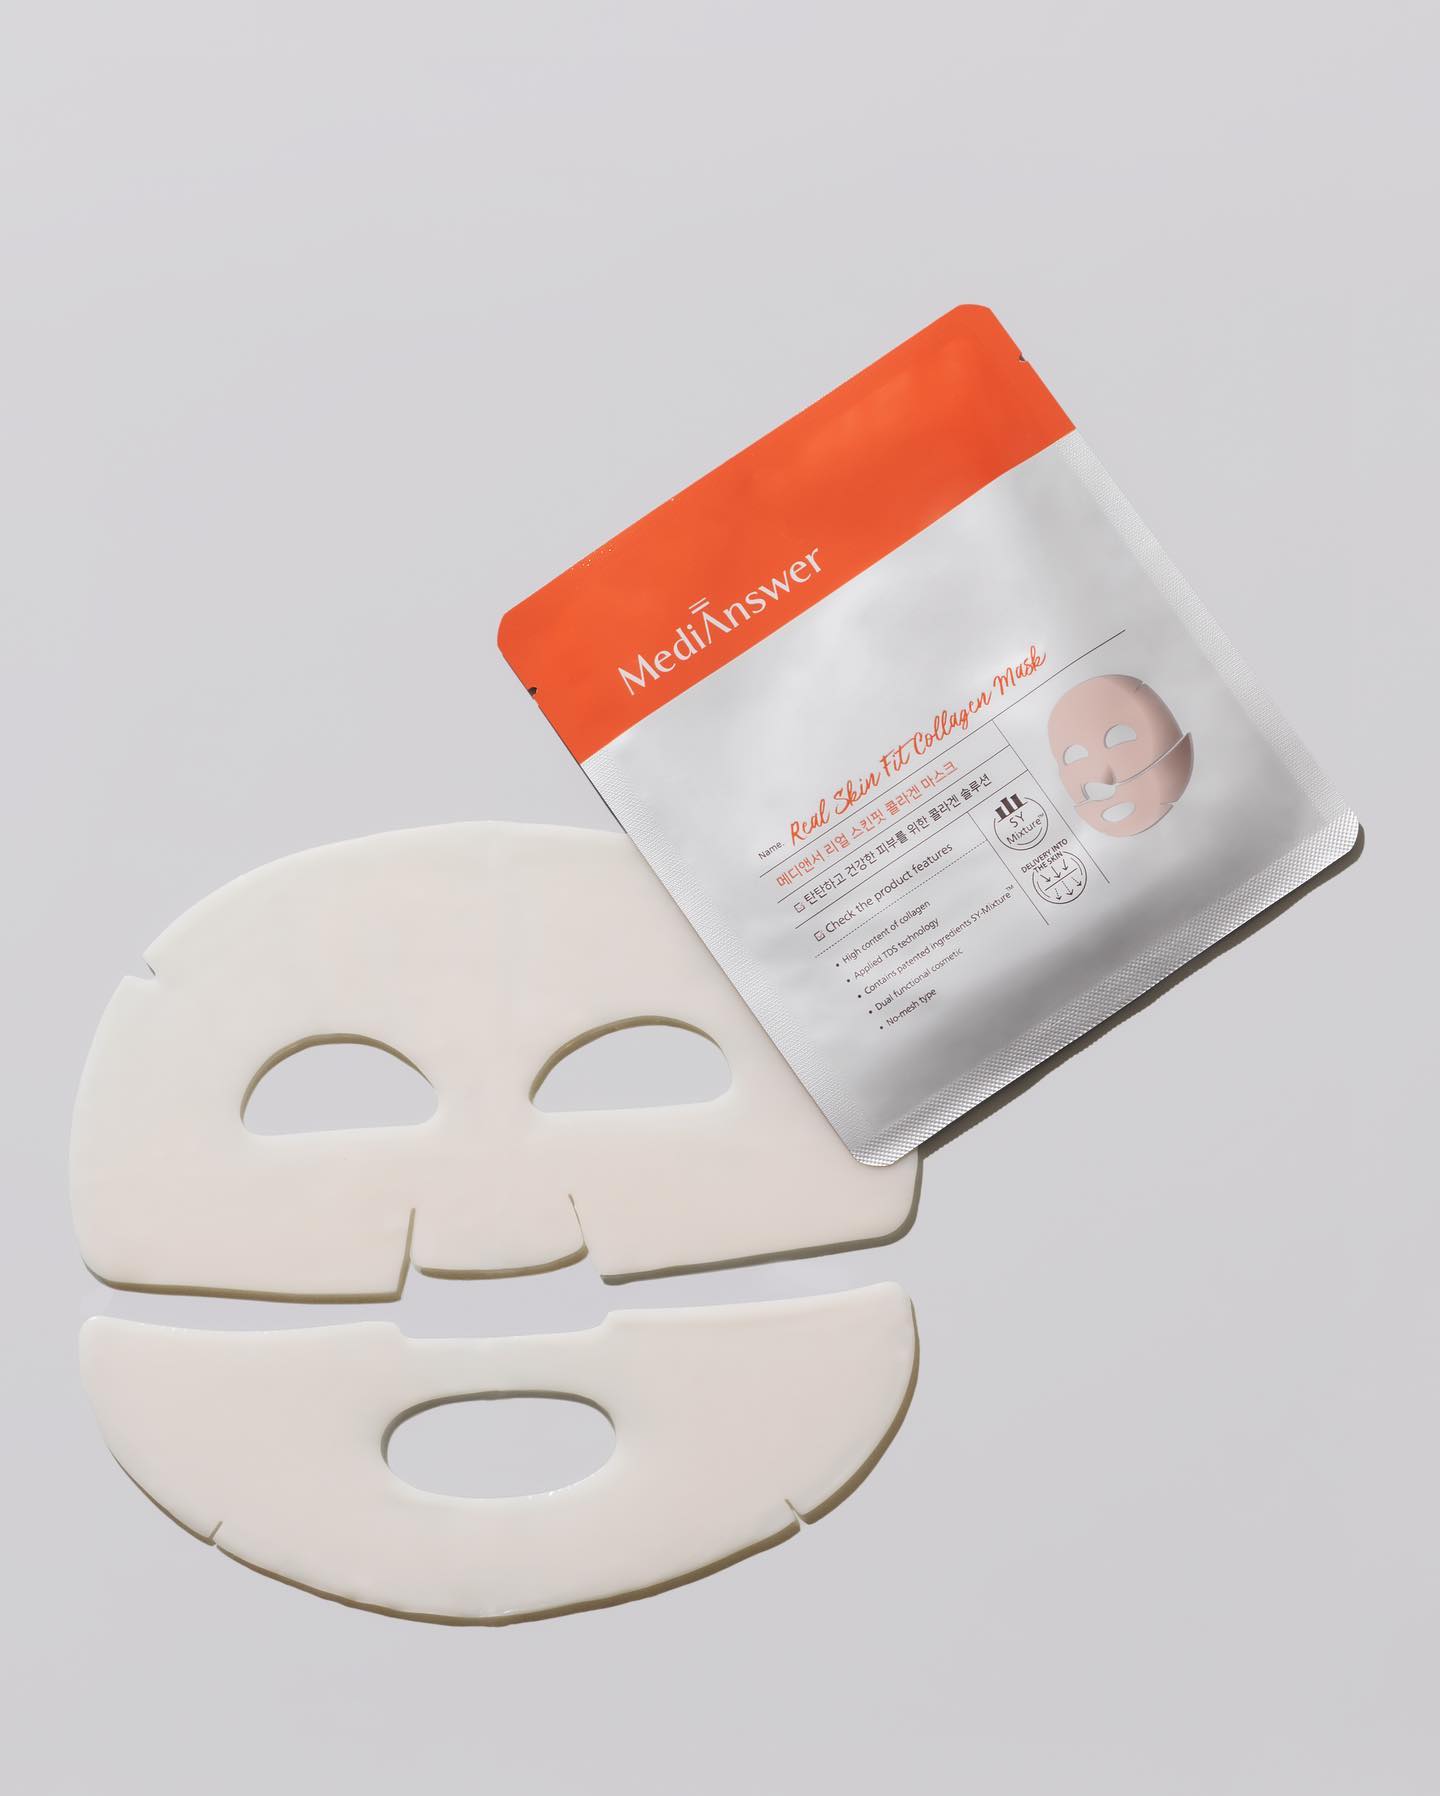 Mặt Nạ MediAnswer Real Skin Fit Collagen Mask